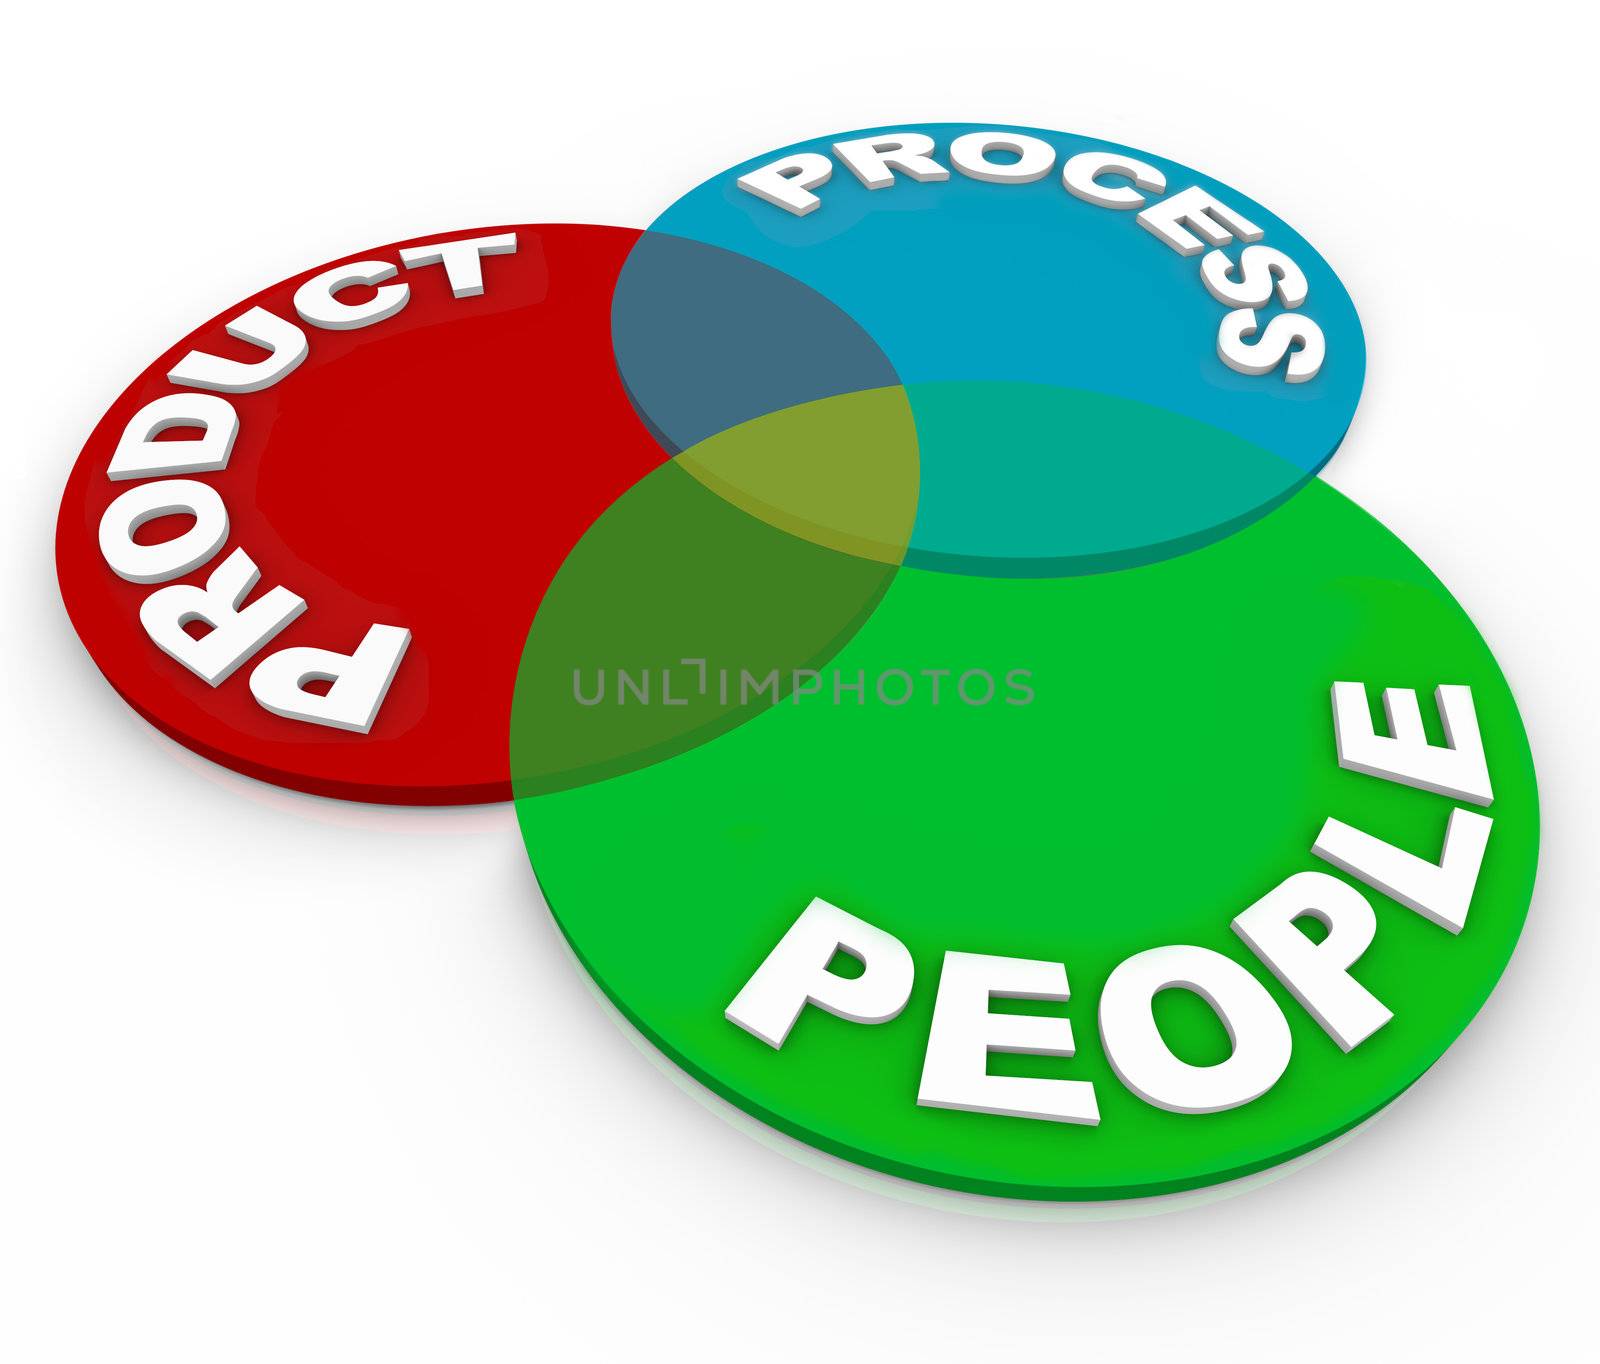 A management venn diagram illustrating business principles of product lifecycle planning - product, process and people